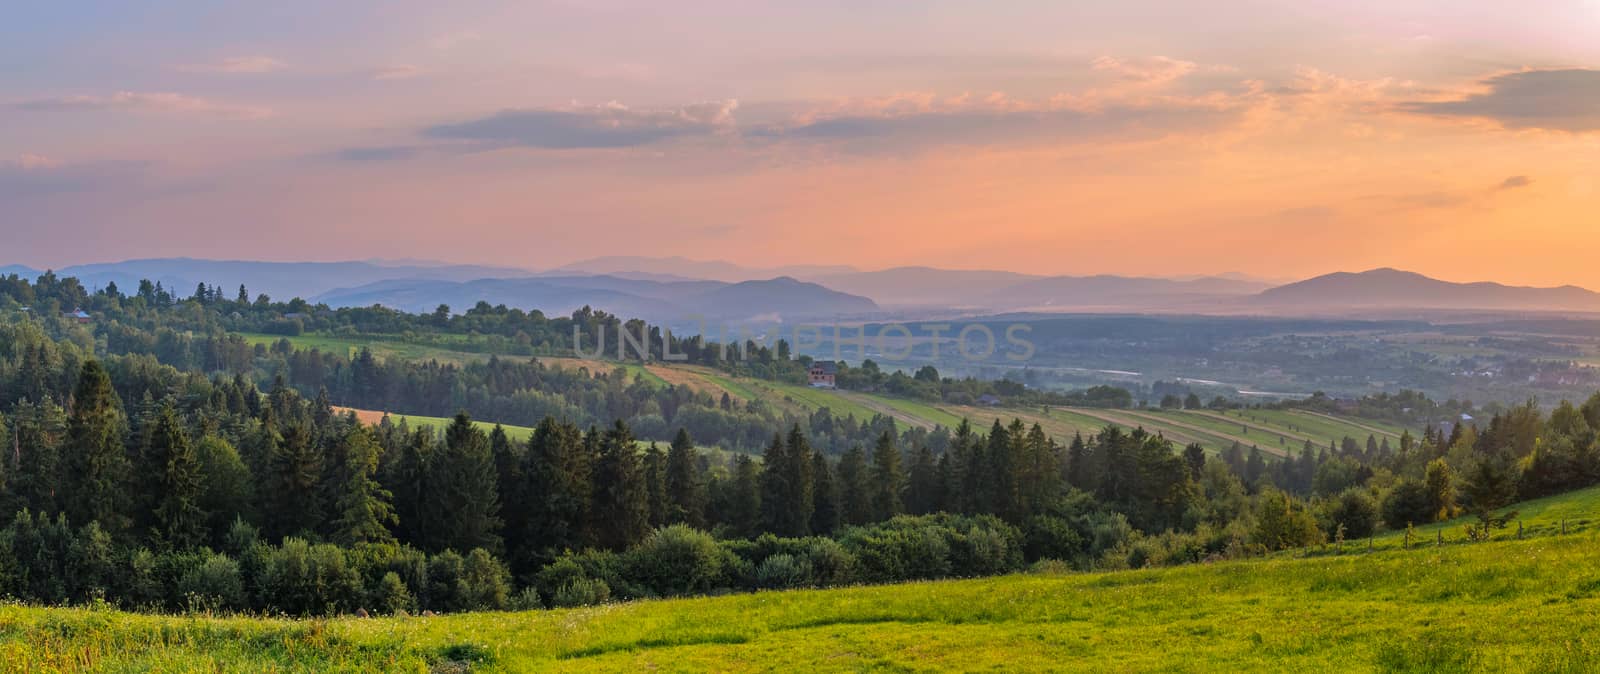 Elegant panorama of the mountainous terrain with valleys forest planting beautiful peaks in the distance against the background of the evening sky.